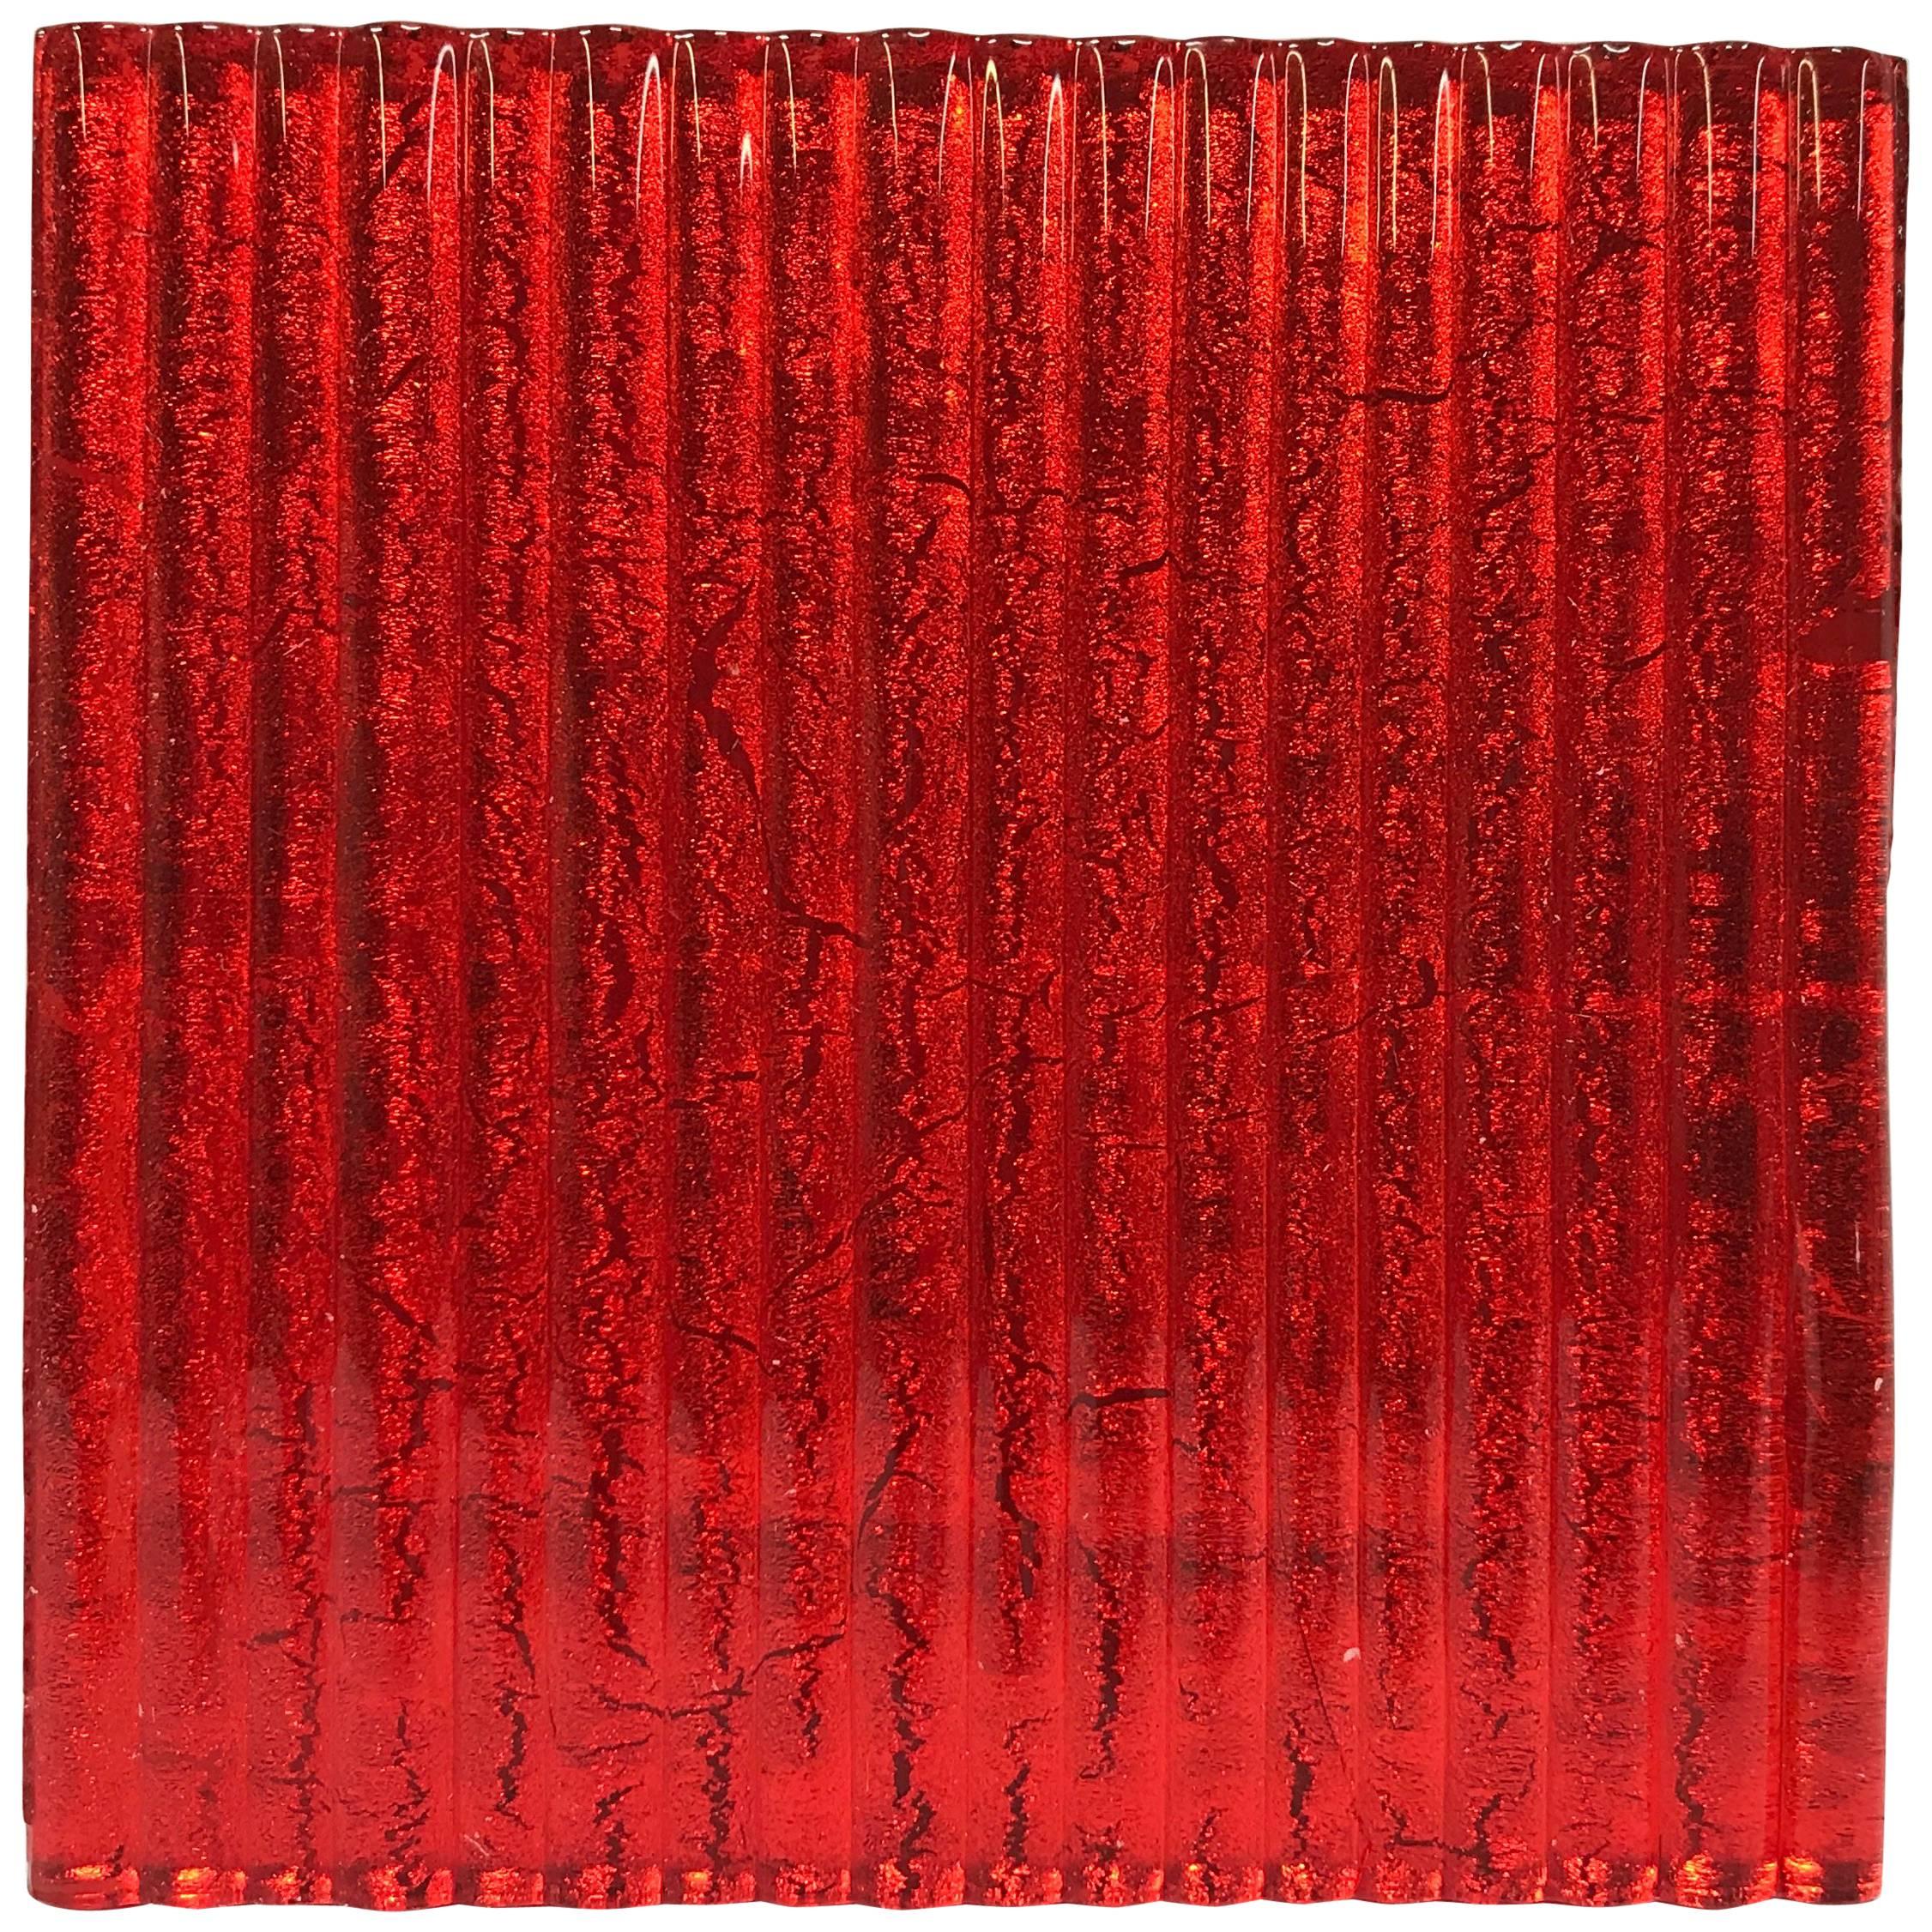 500 Murano Textured Glass Tiles in Red, Italy, 2017 For Sale